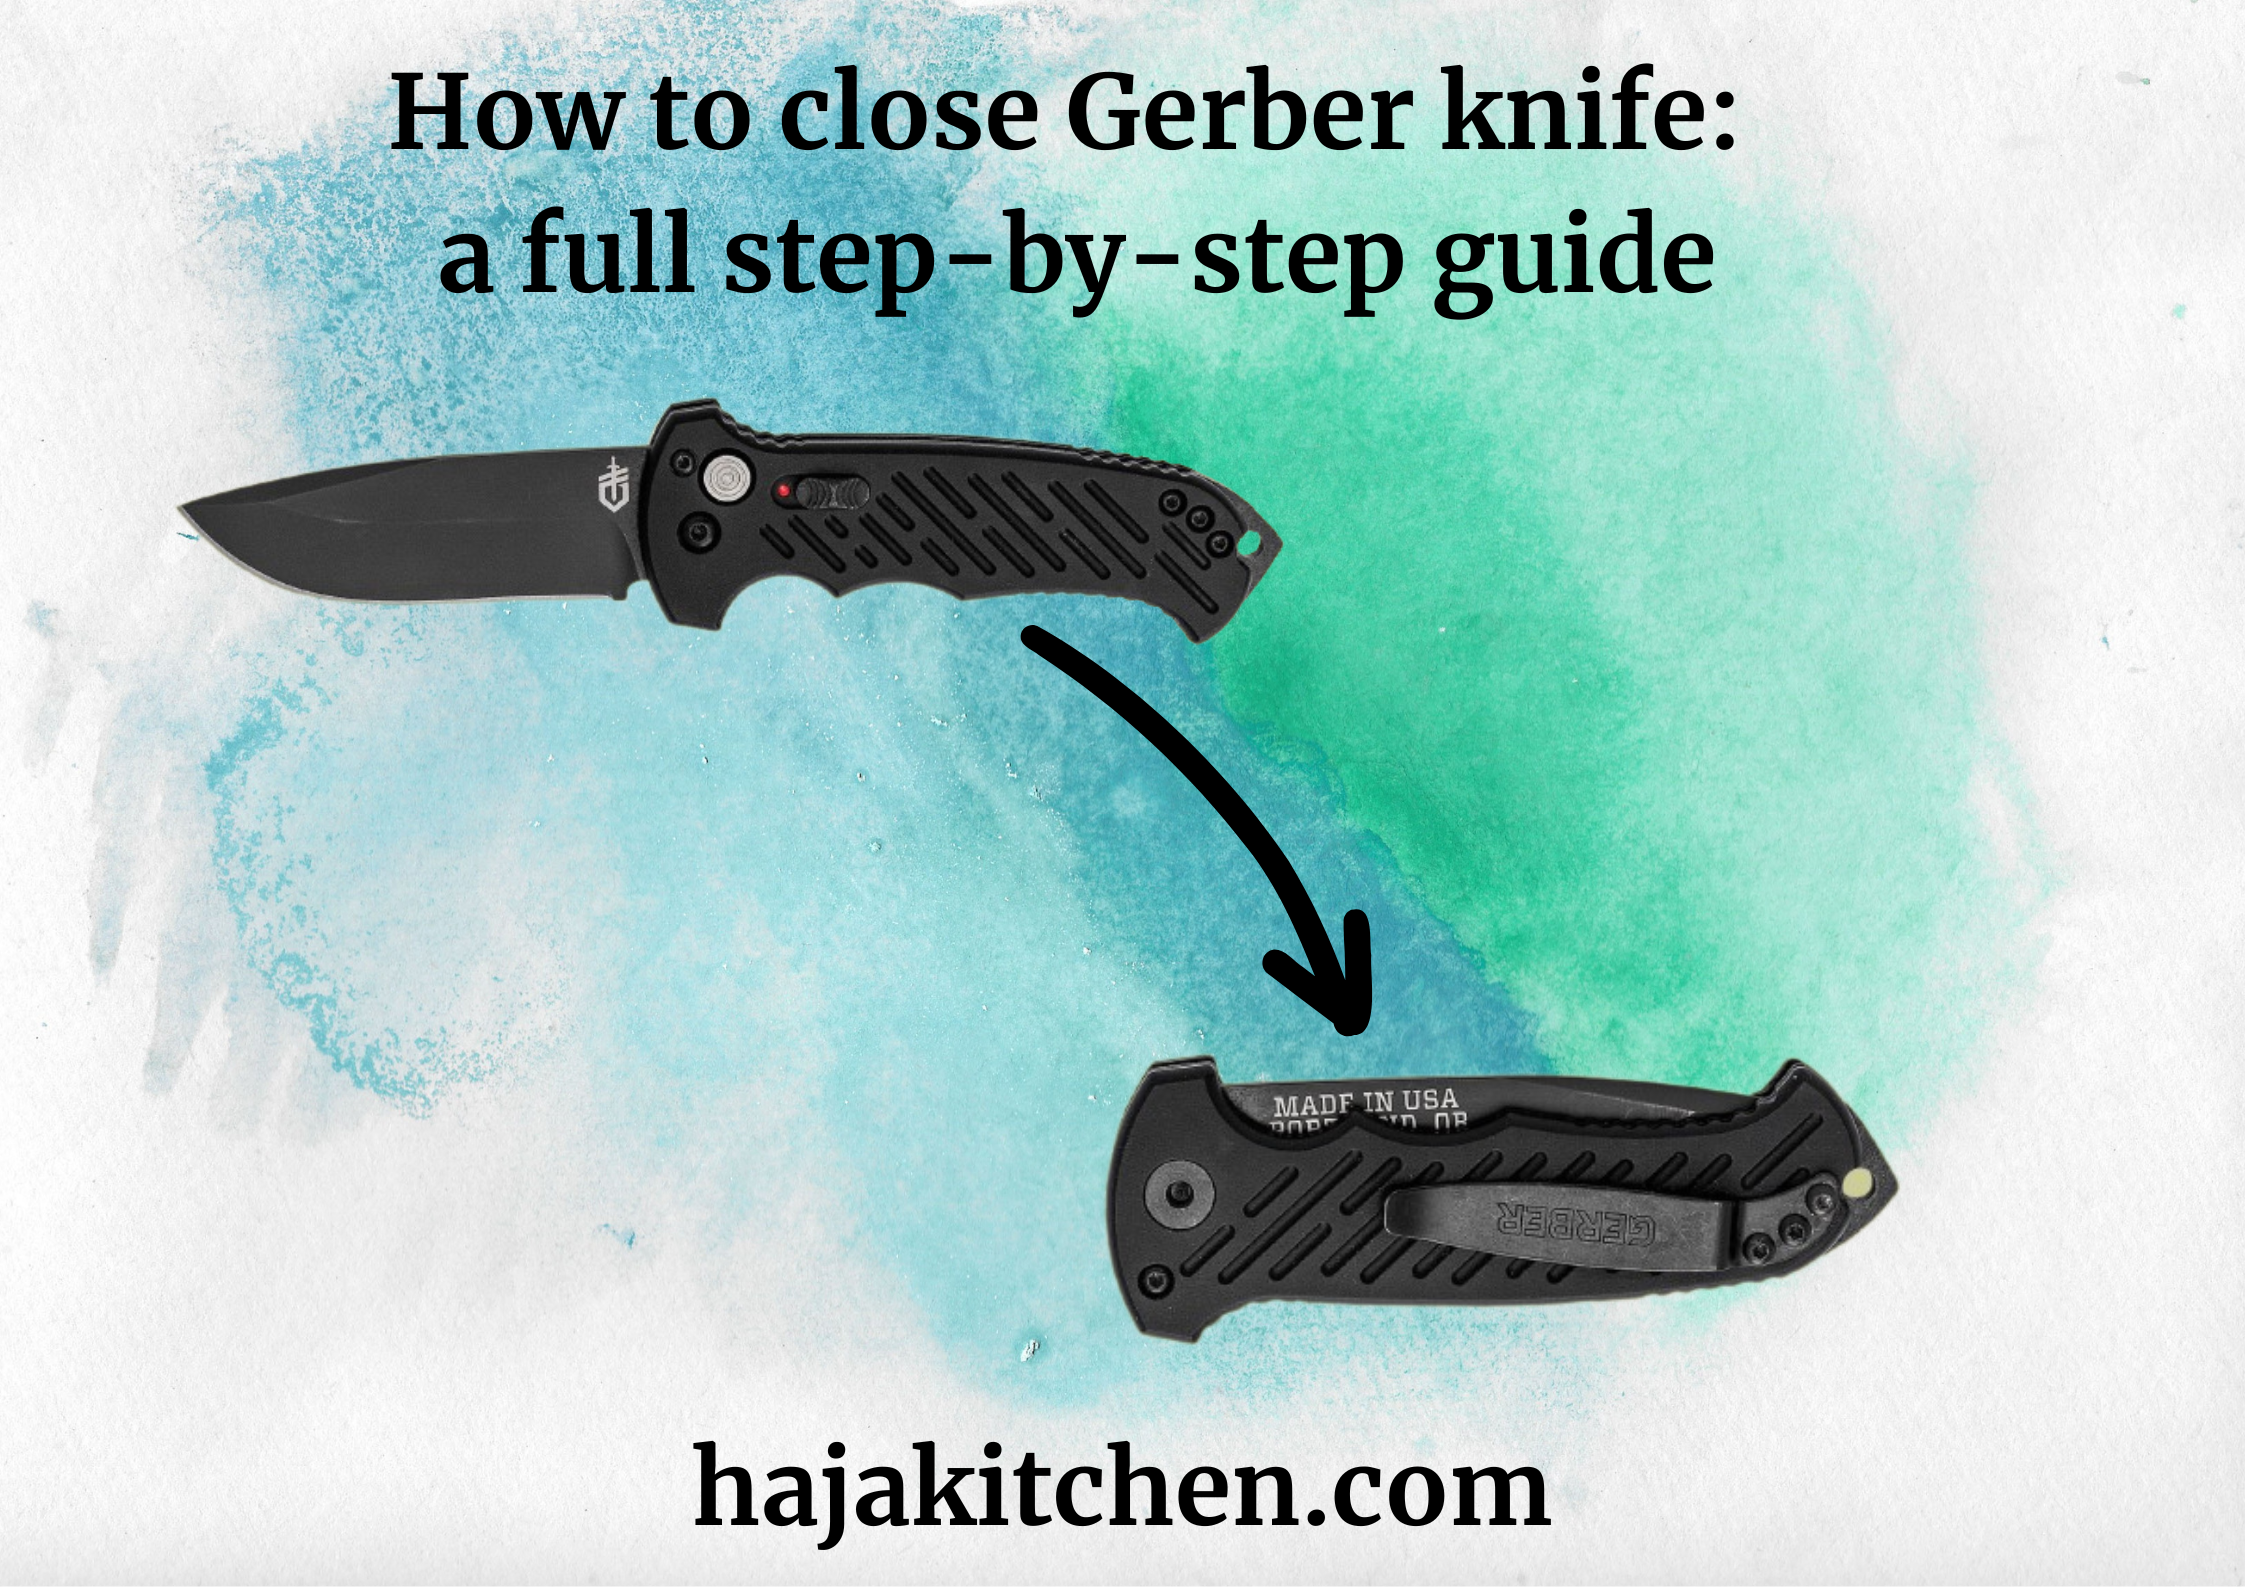 How to close Gerber knife a full step-by-step guide